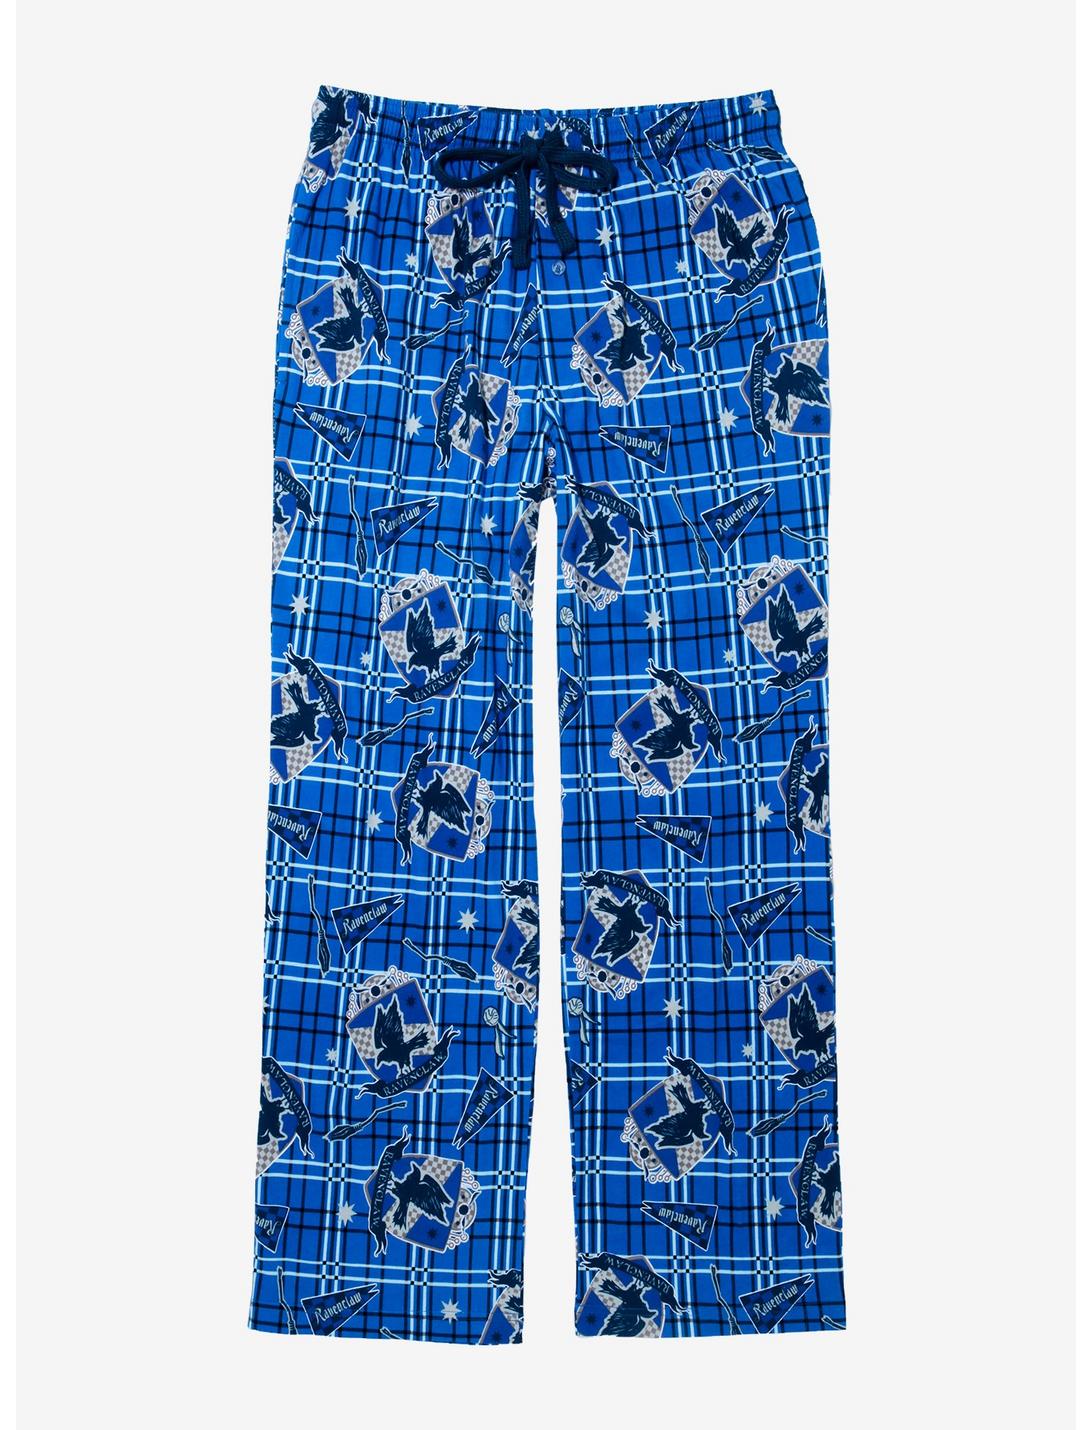 Harry Potter Ravenclaw Crest Sleep Pants - BoxLunch Exclusive, MULTI, hi-res